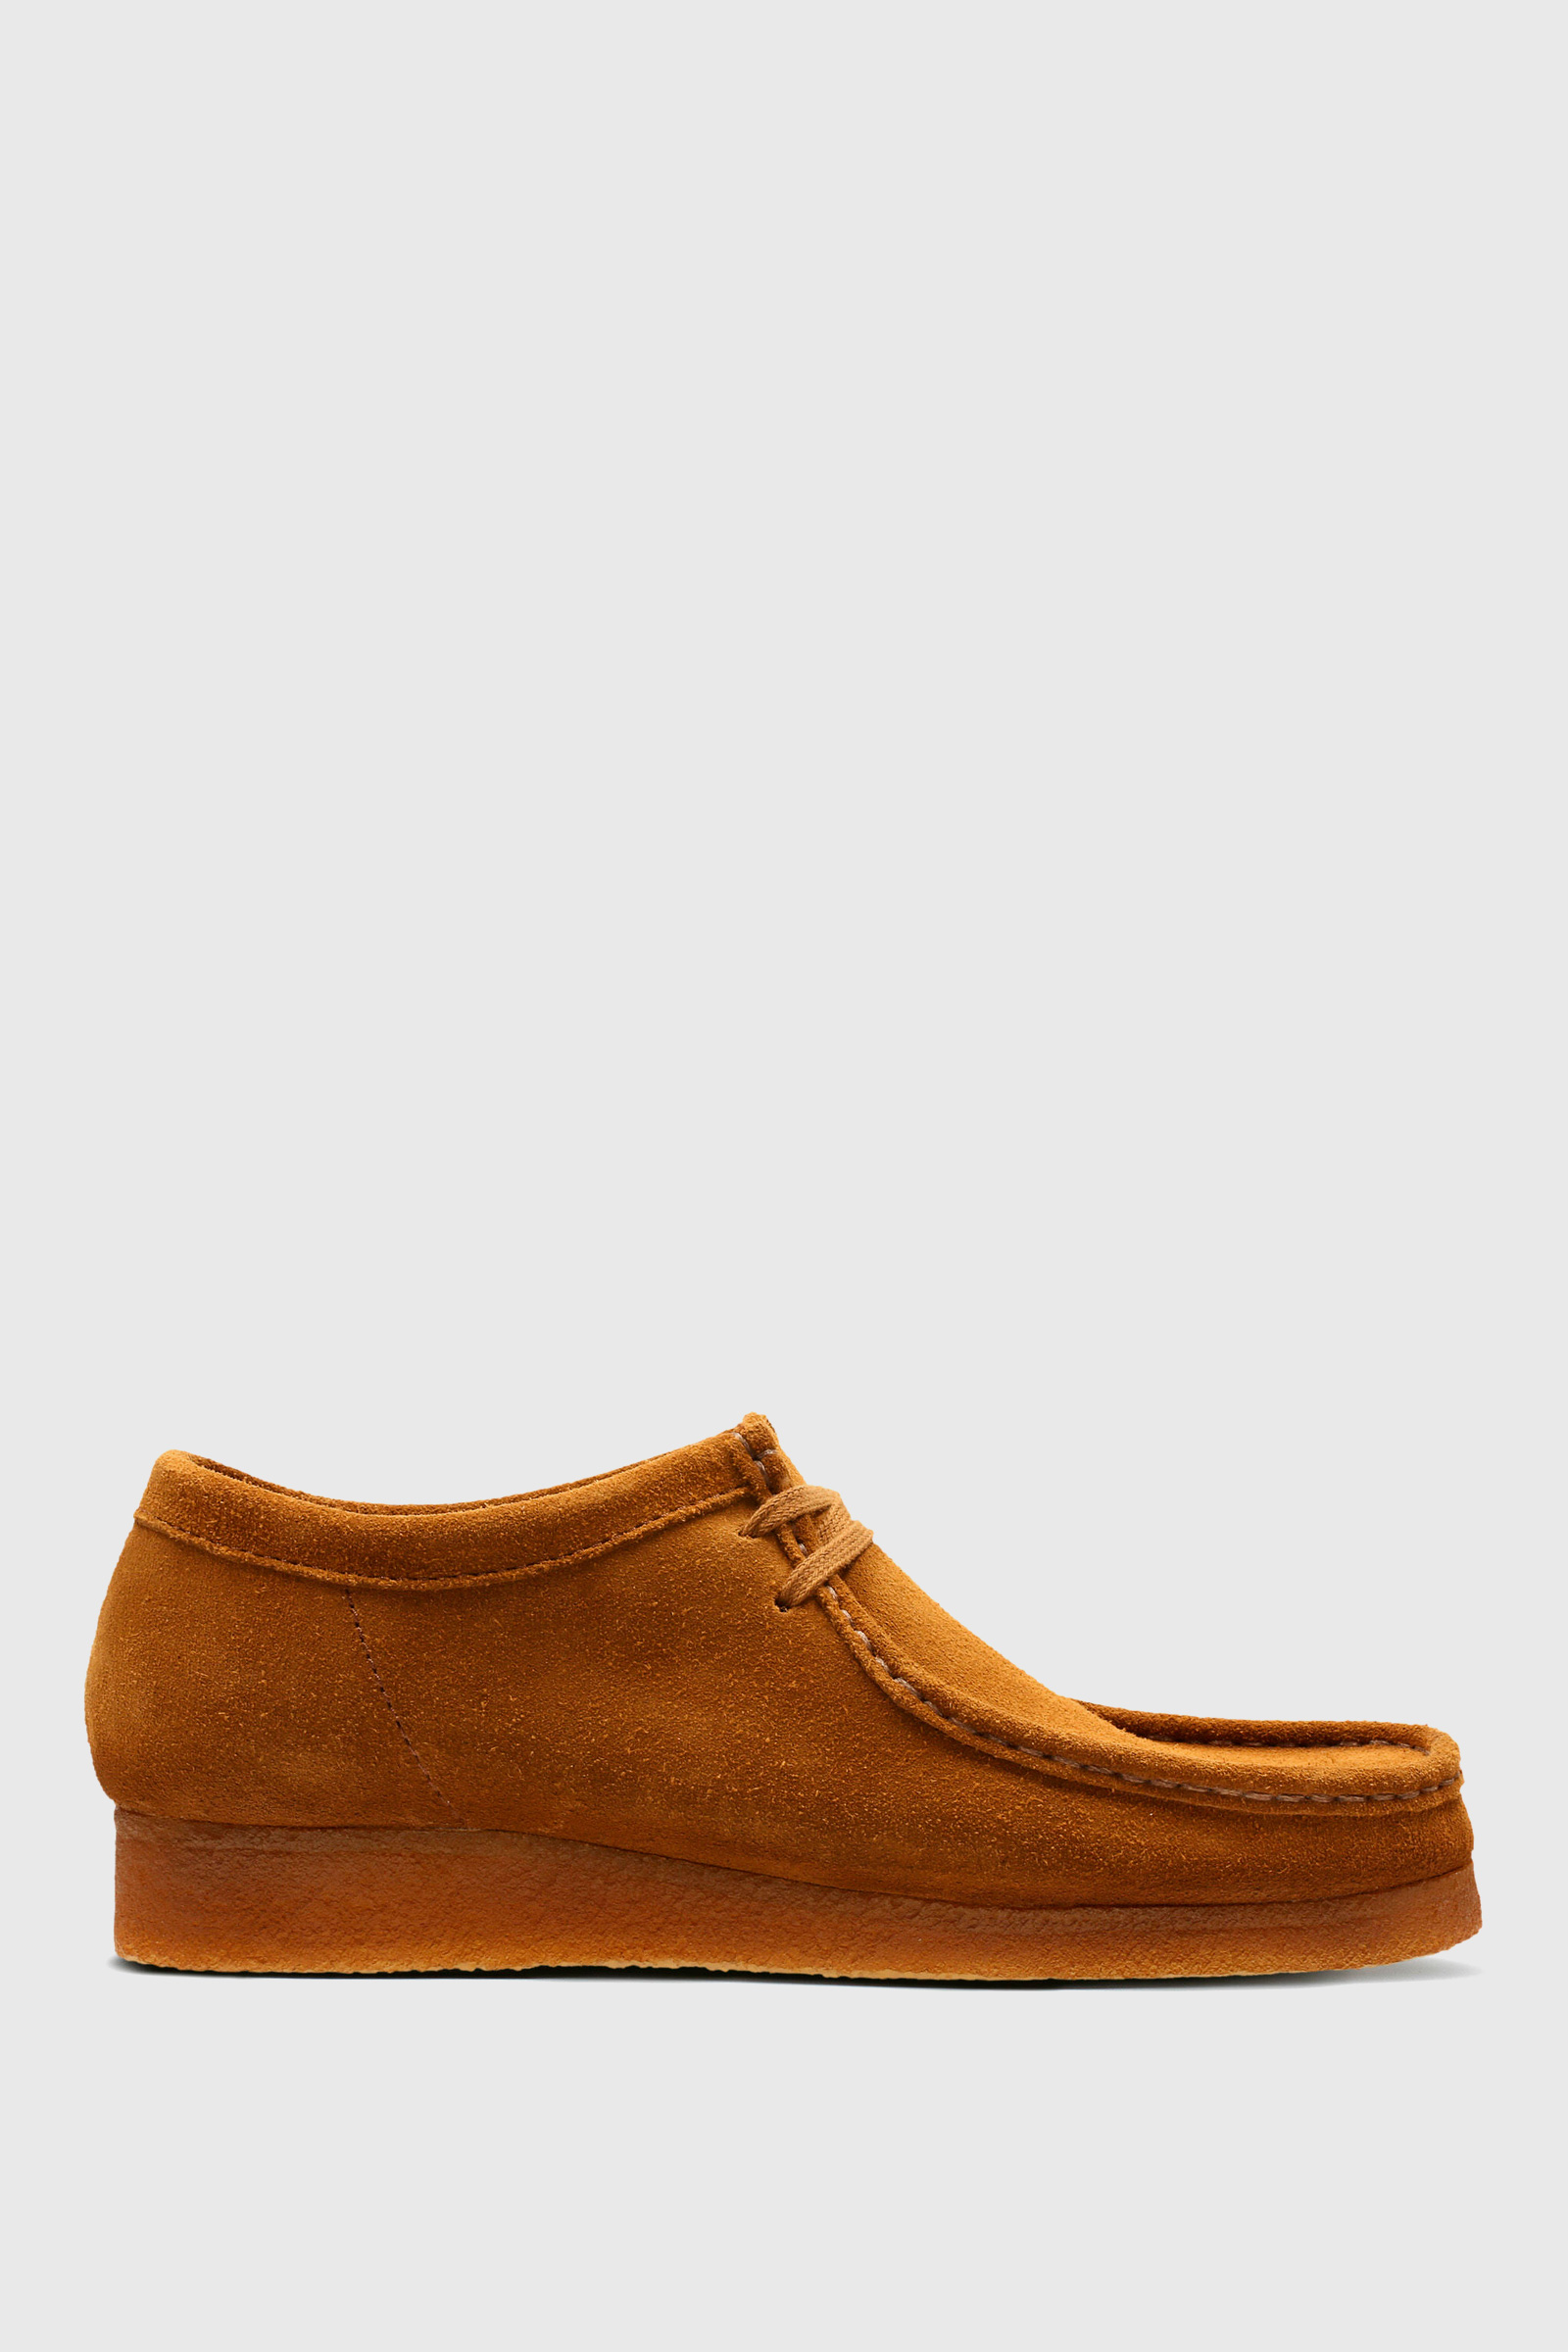 clarks wallabee moccasin